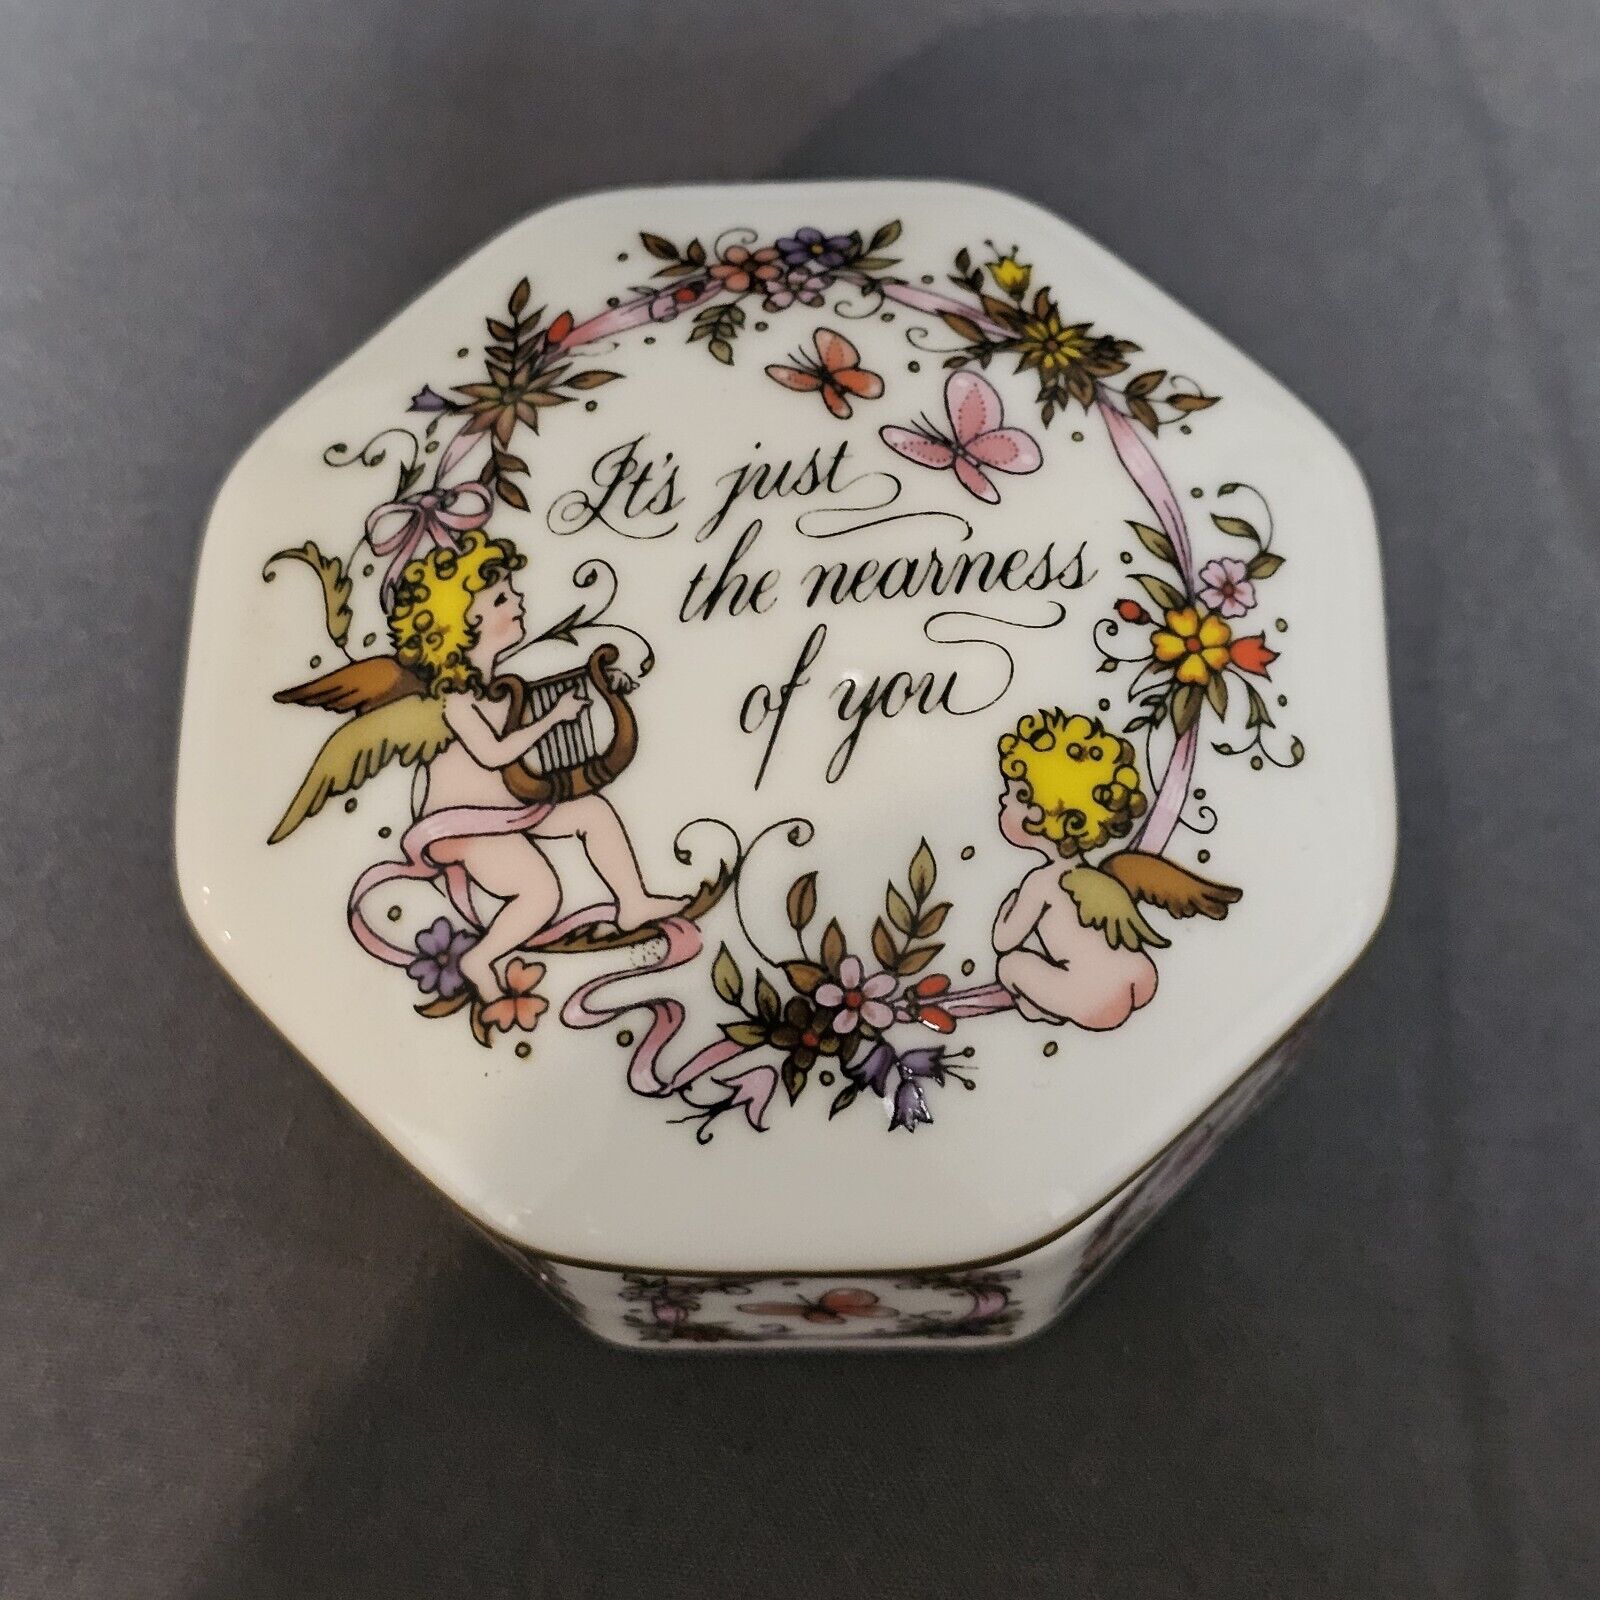 Franklin Mint Songs Of Love Ceramic Music Box Kate Jones Nearness Of You